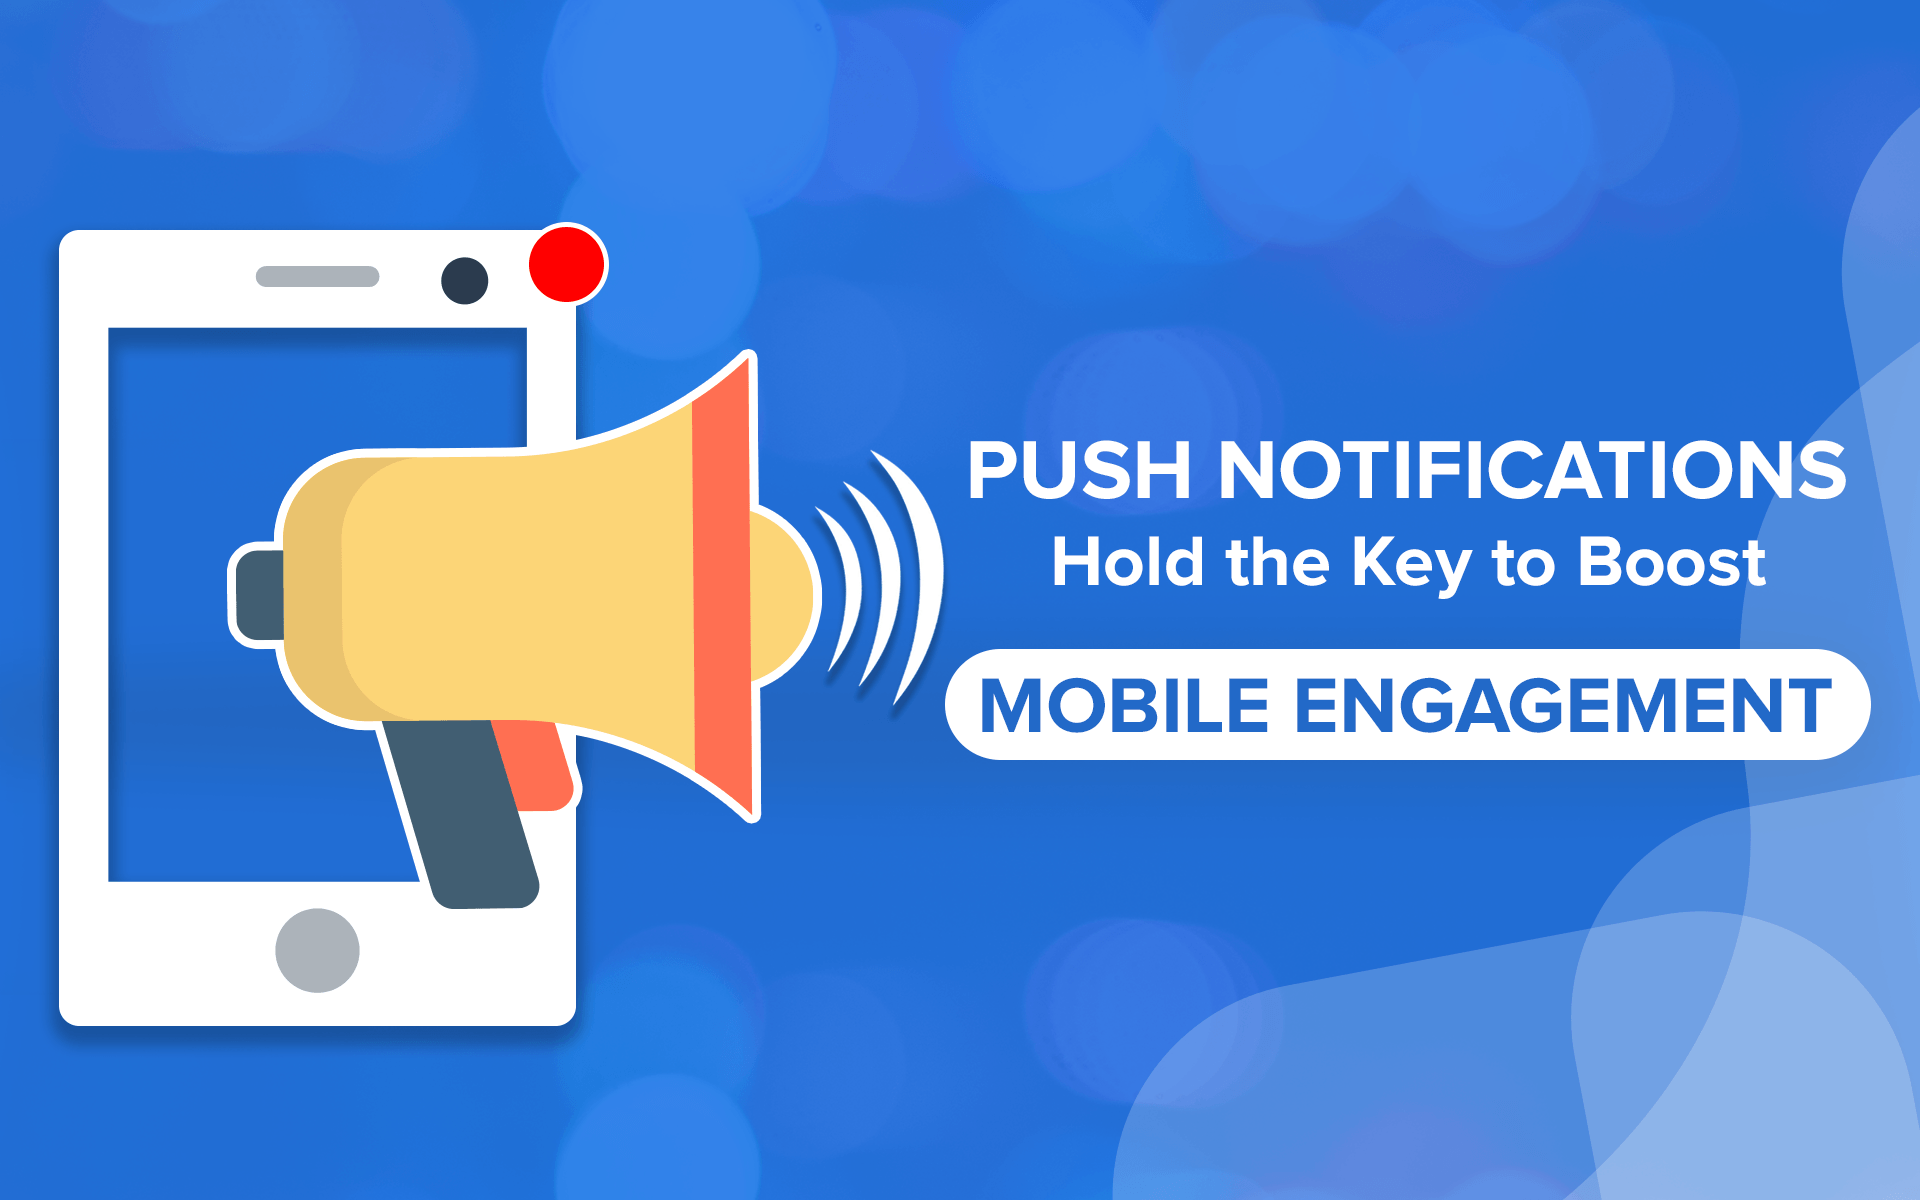 Push Notifications Hold the Key to Boost Mobile Engagement